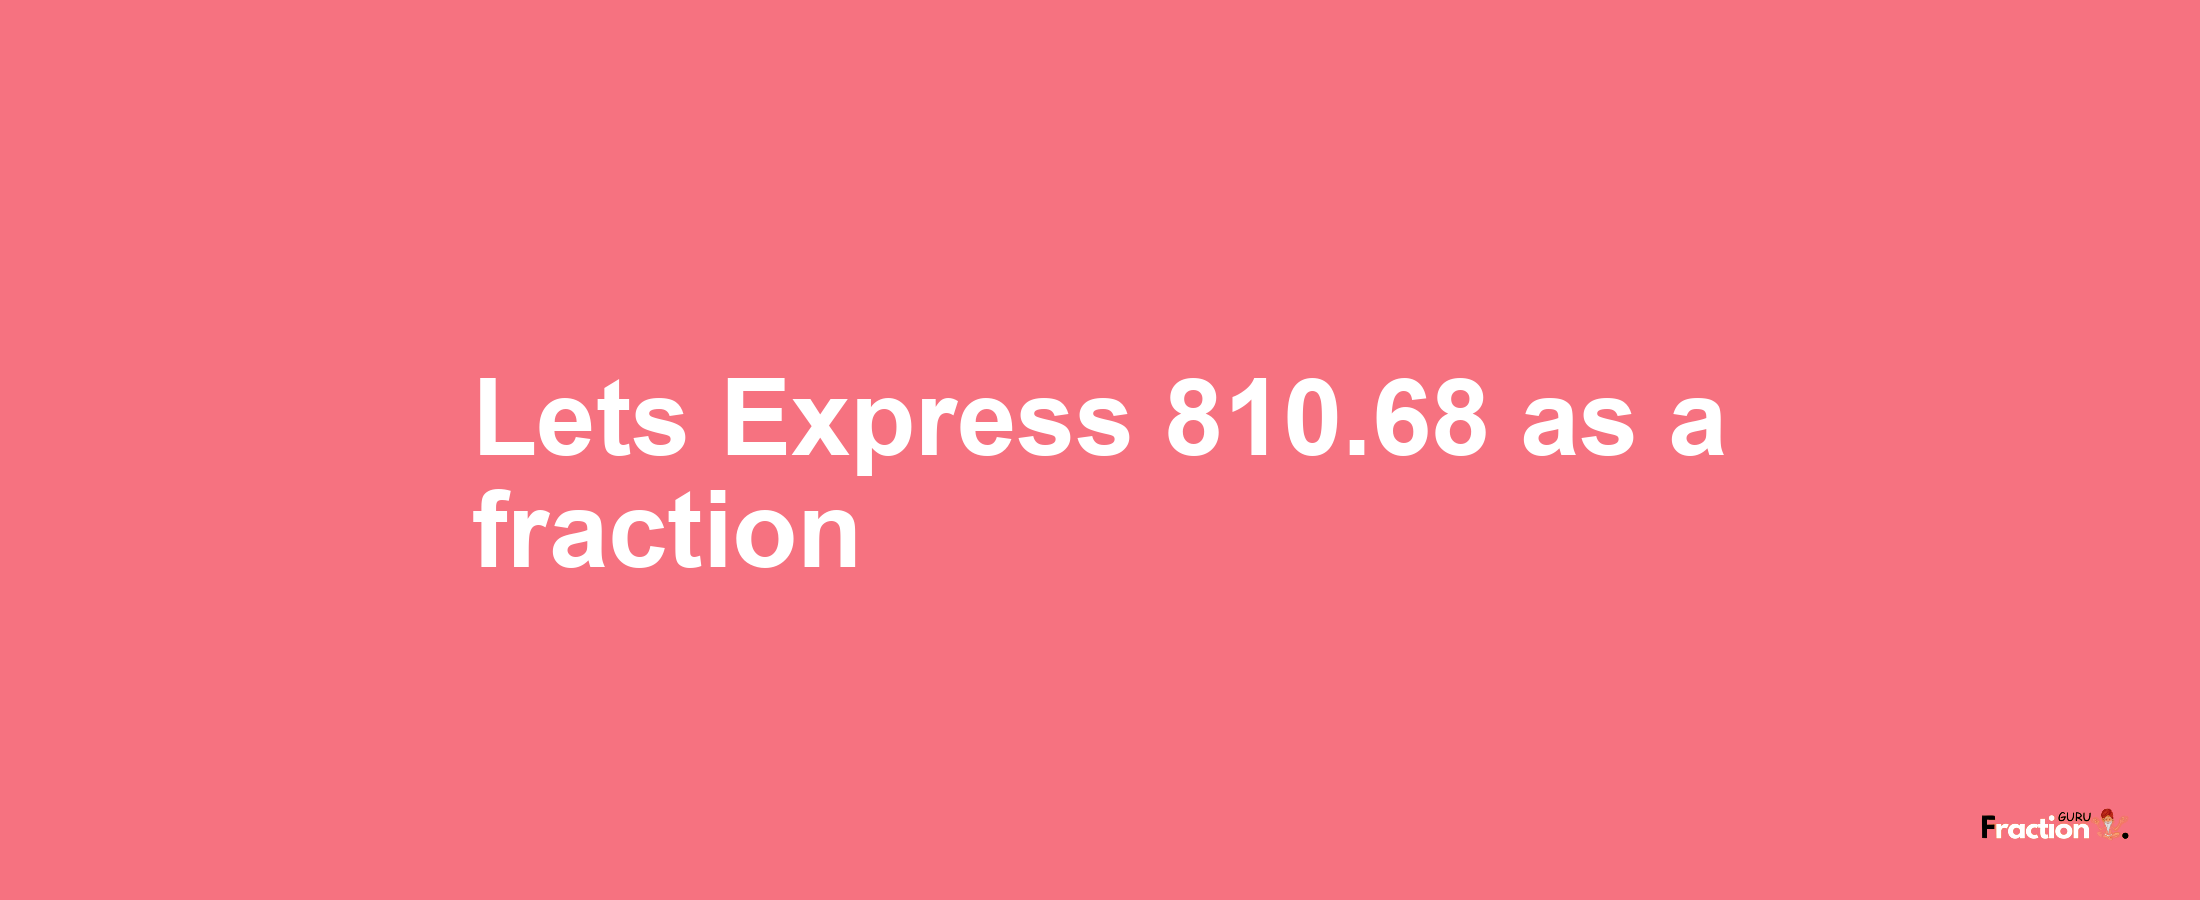 Lets Express 810.68 as afraction